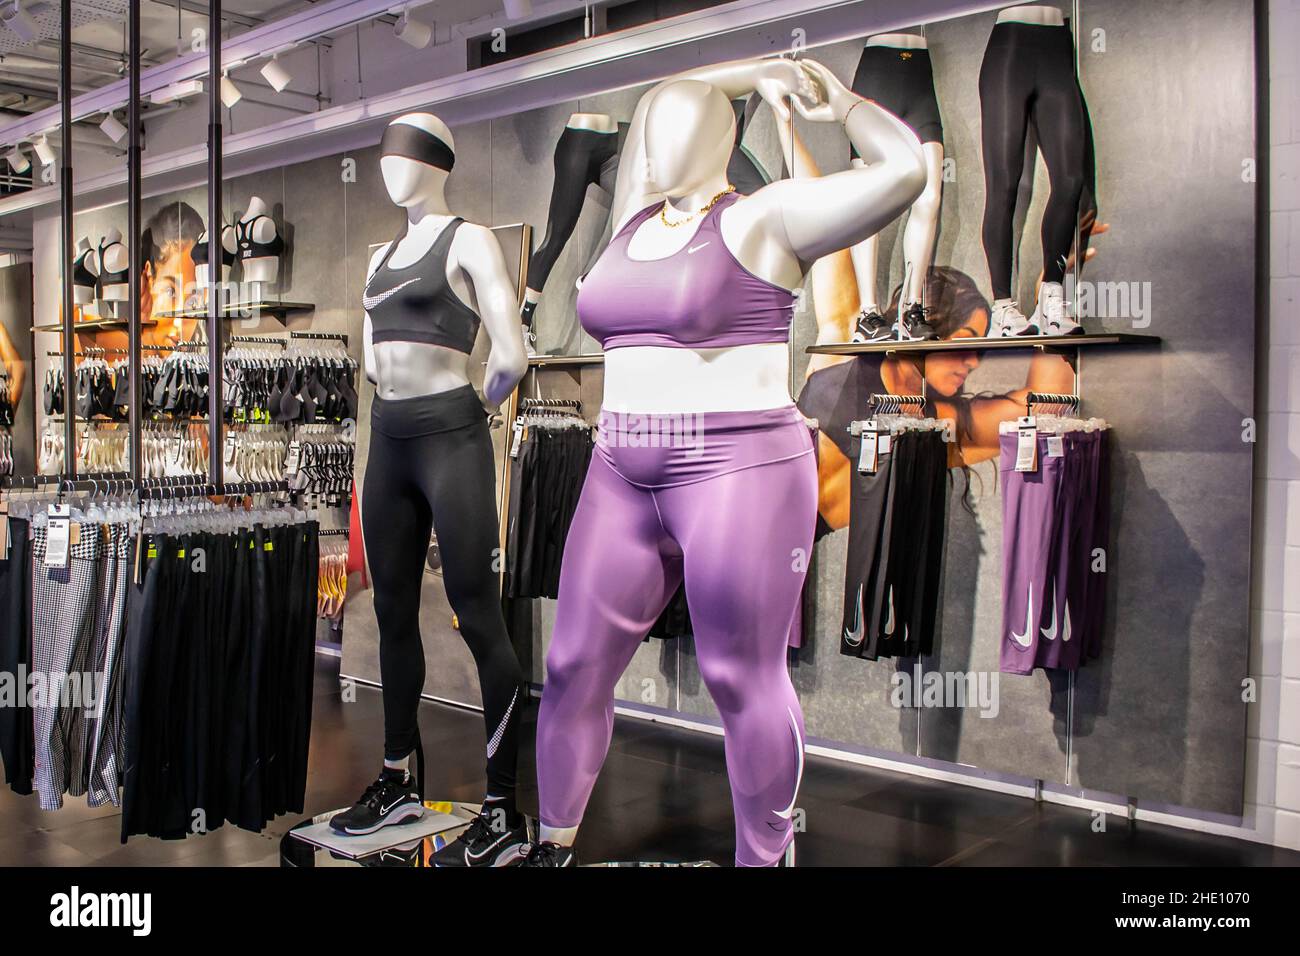 Plus Size Mannequin High Resolution Stock Photography and Images - Alamy